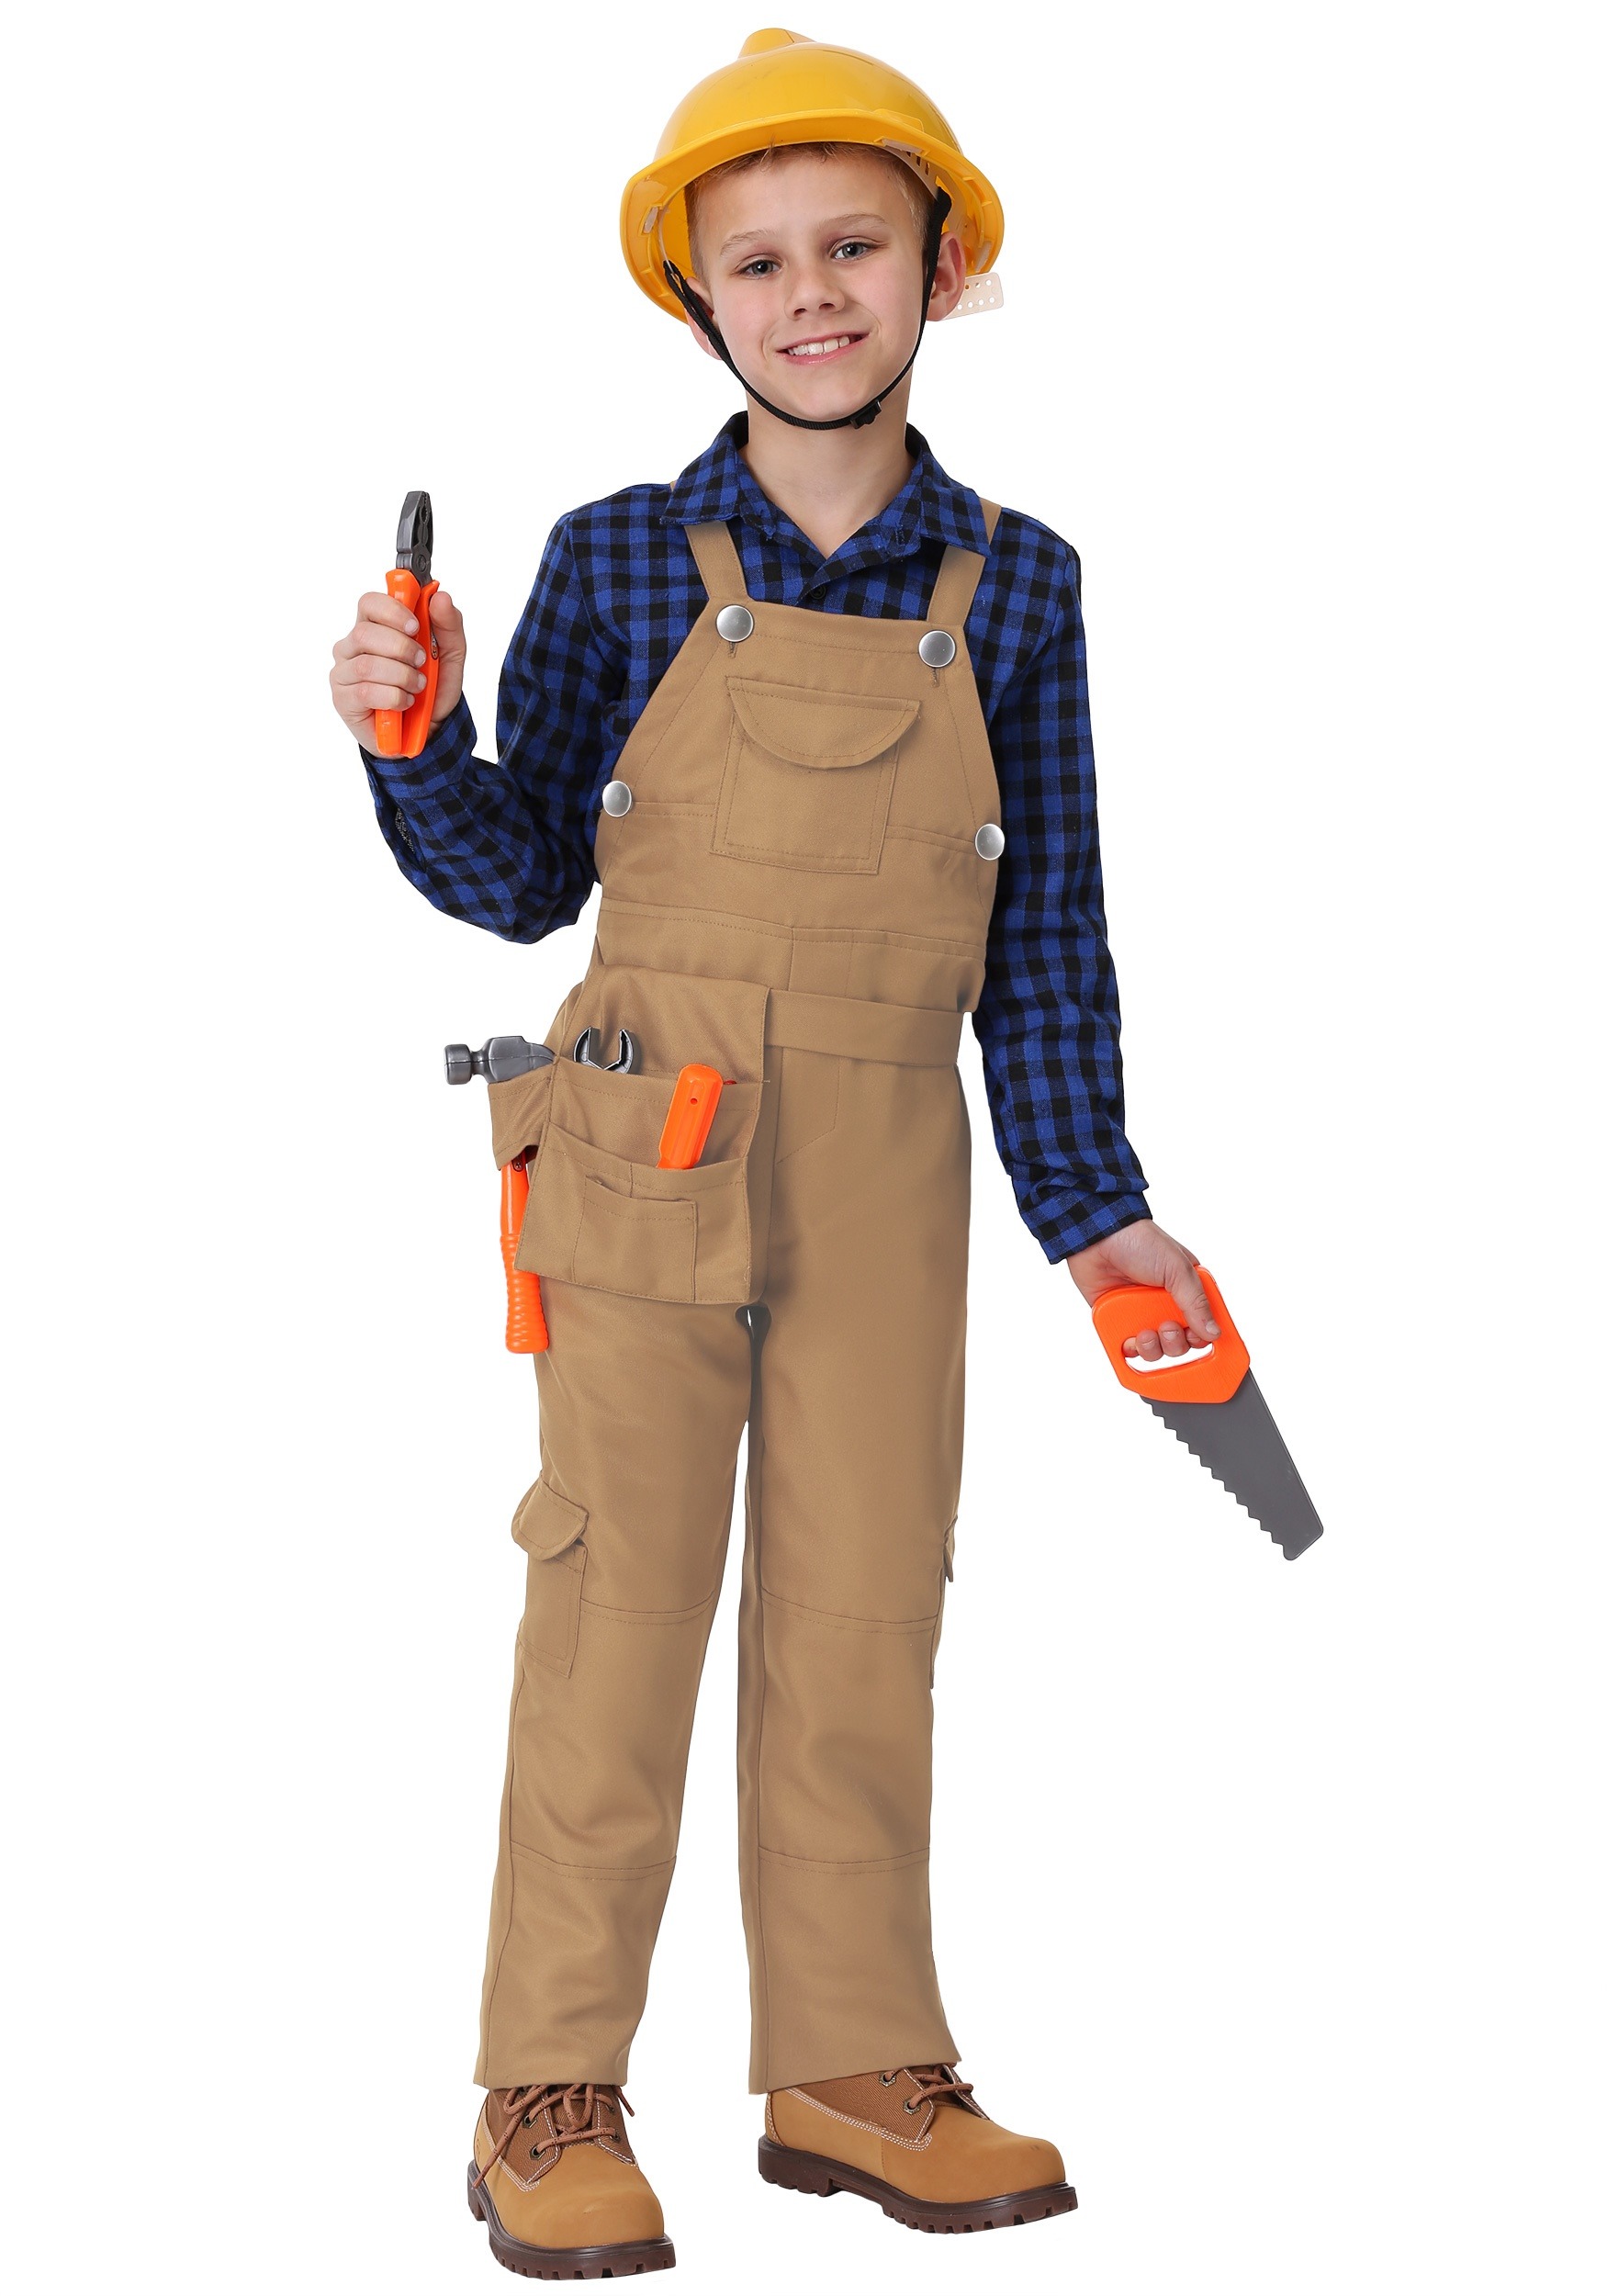 Construction Worker Costume for Kids